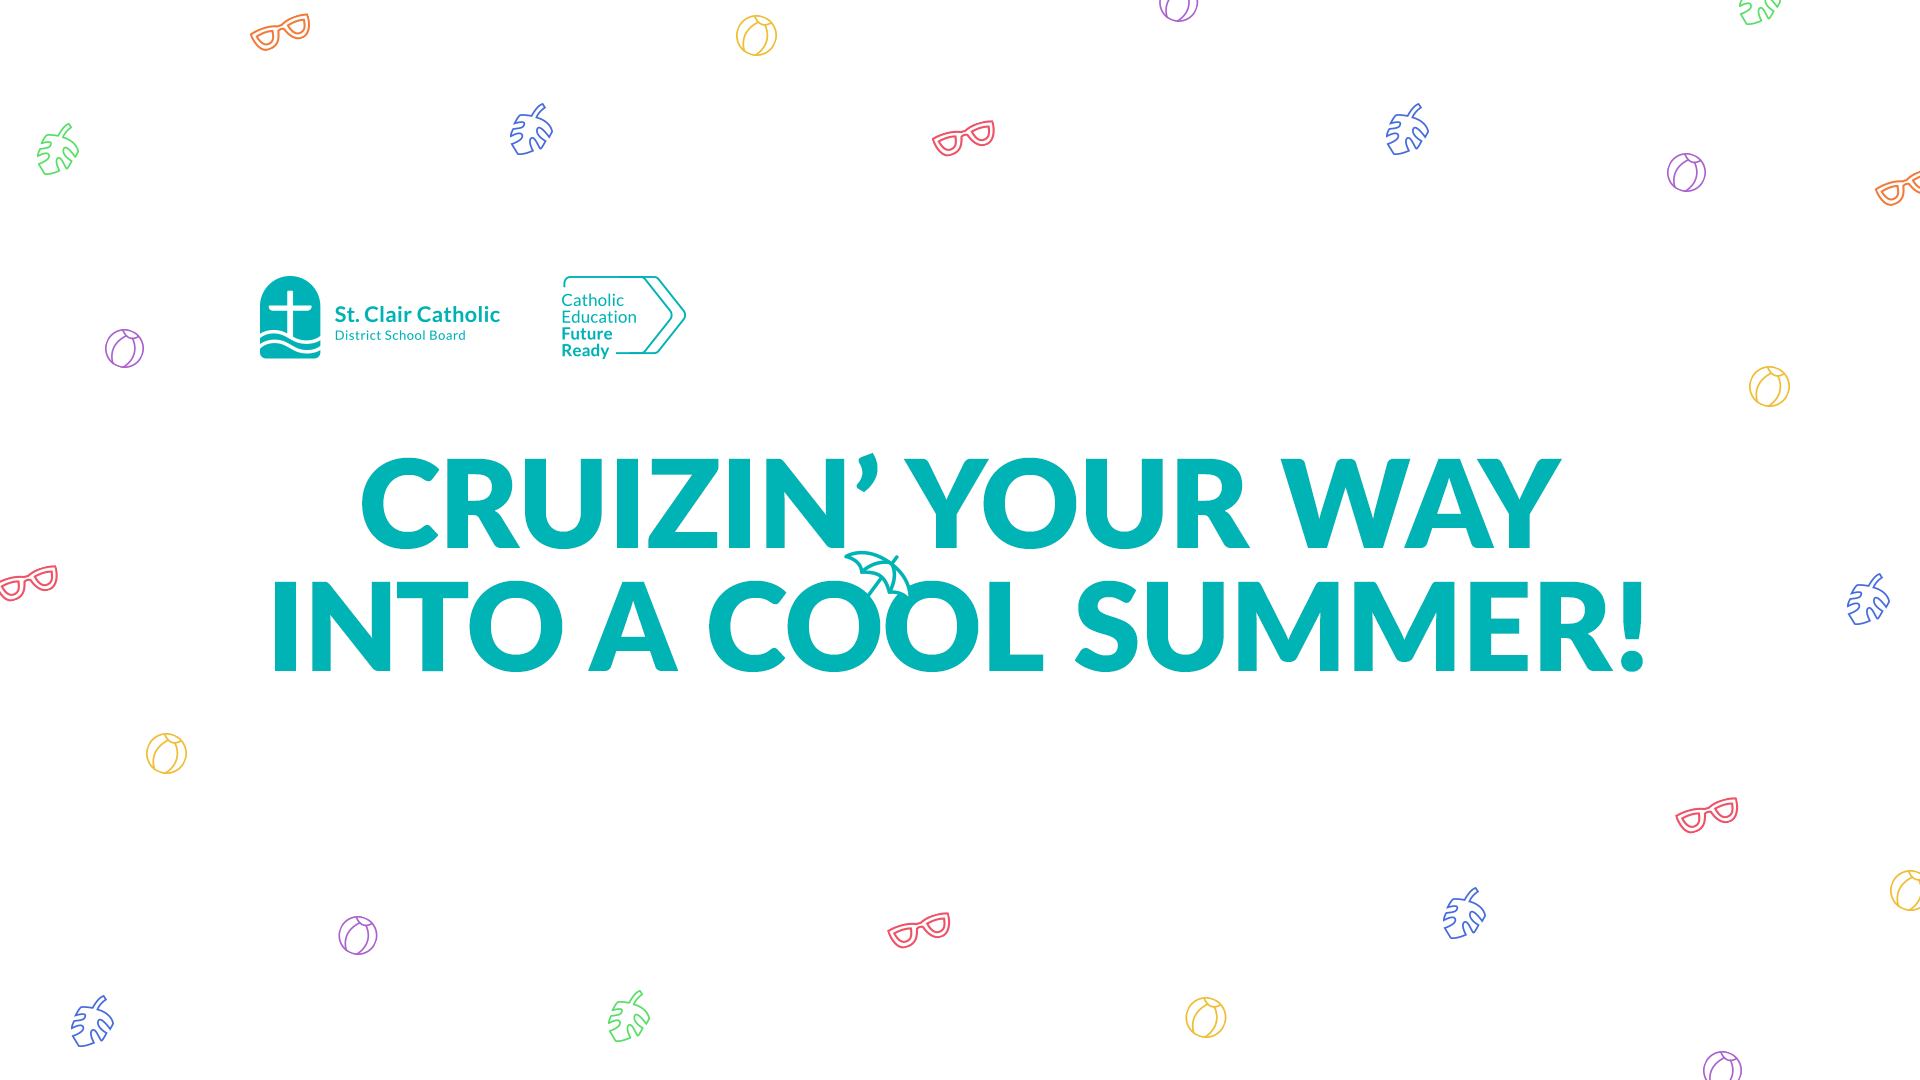 Cruizin’ Your Way into a Cool Summer!